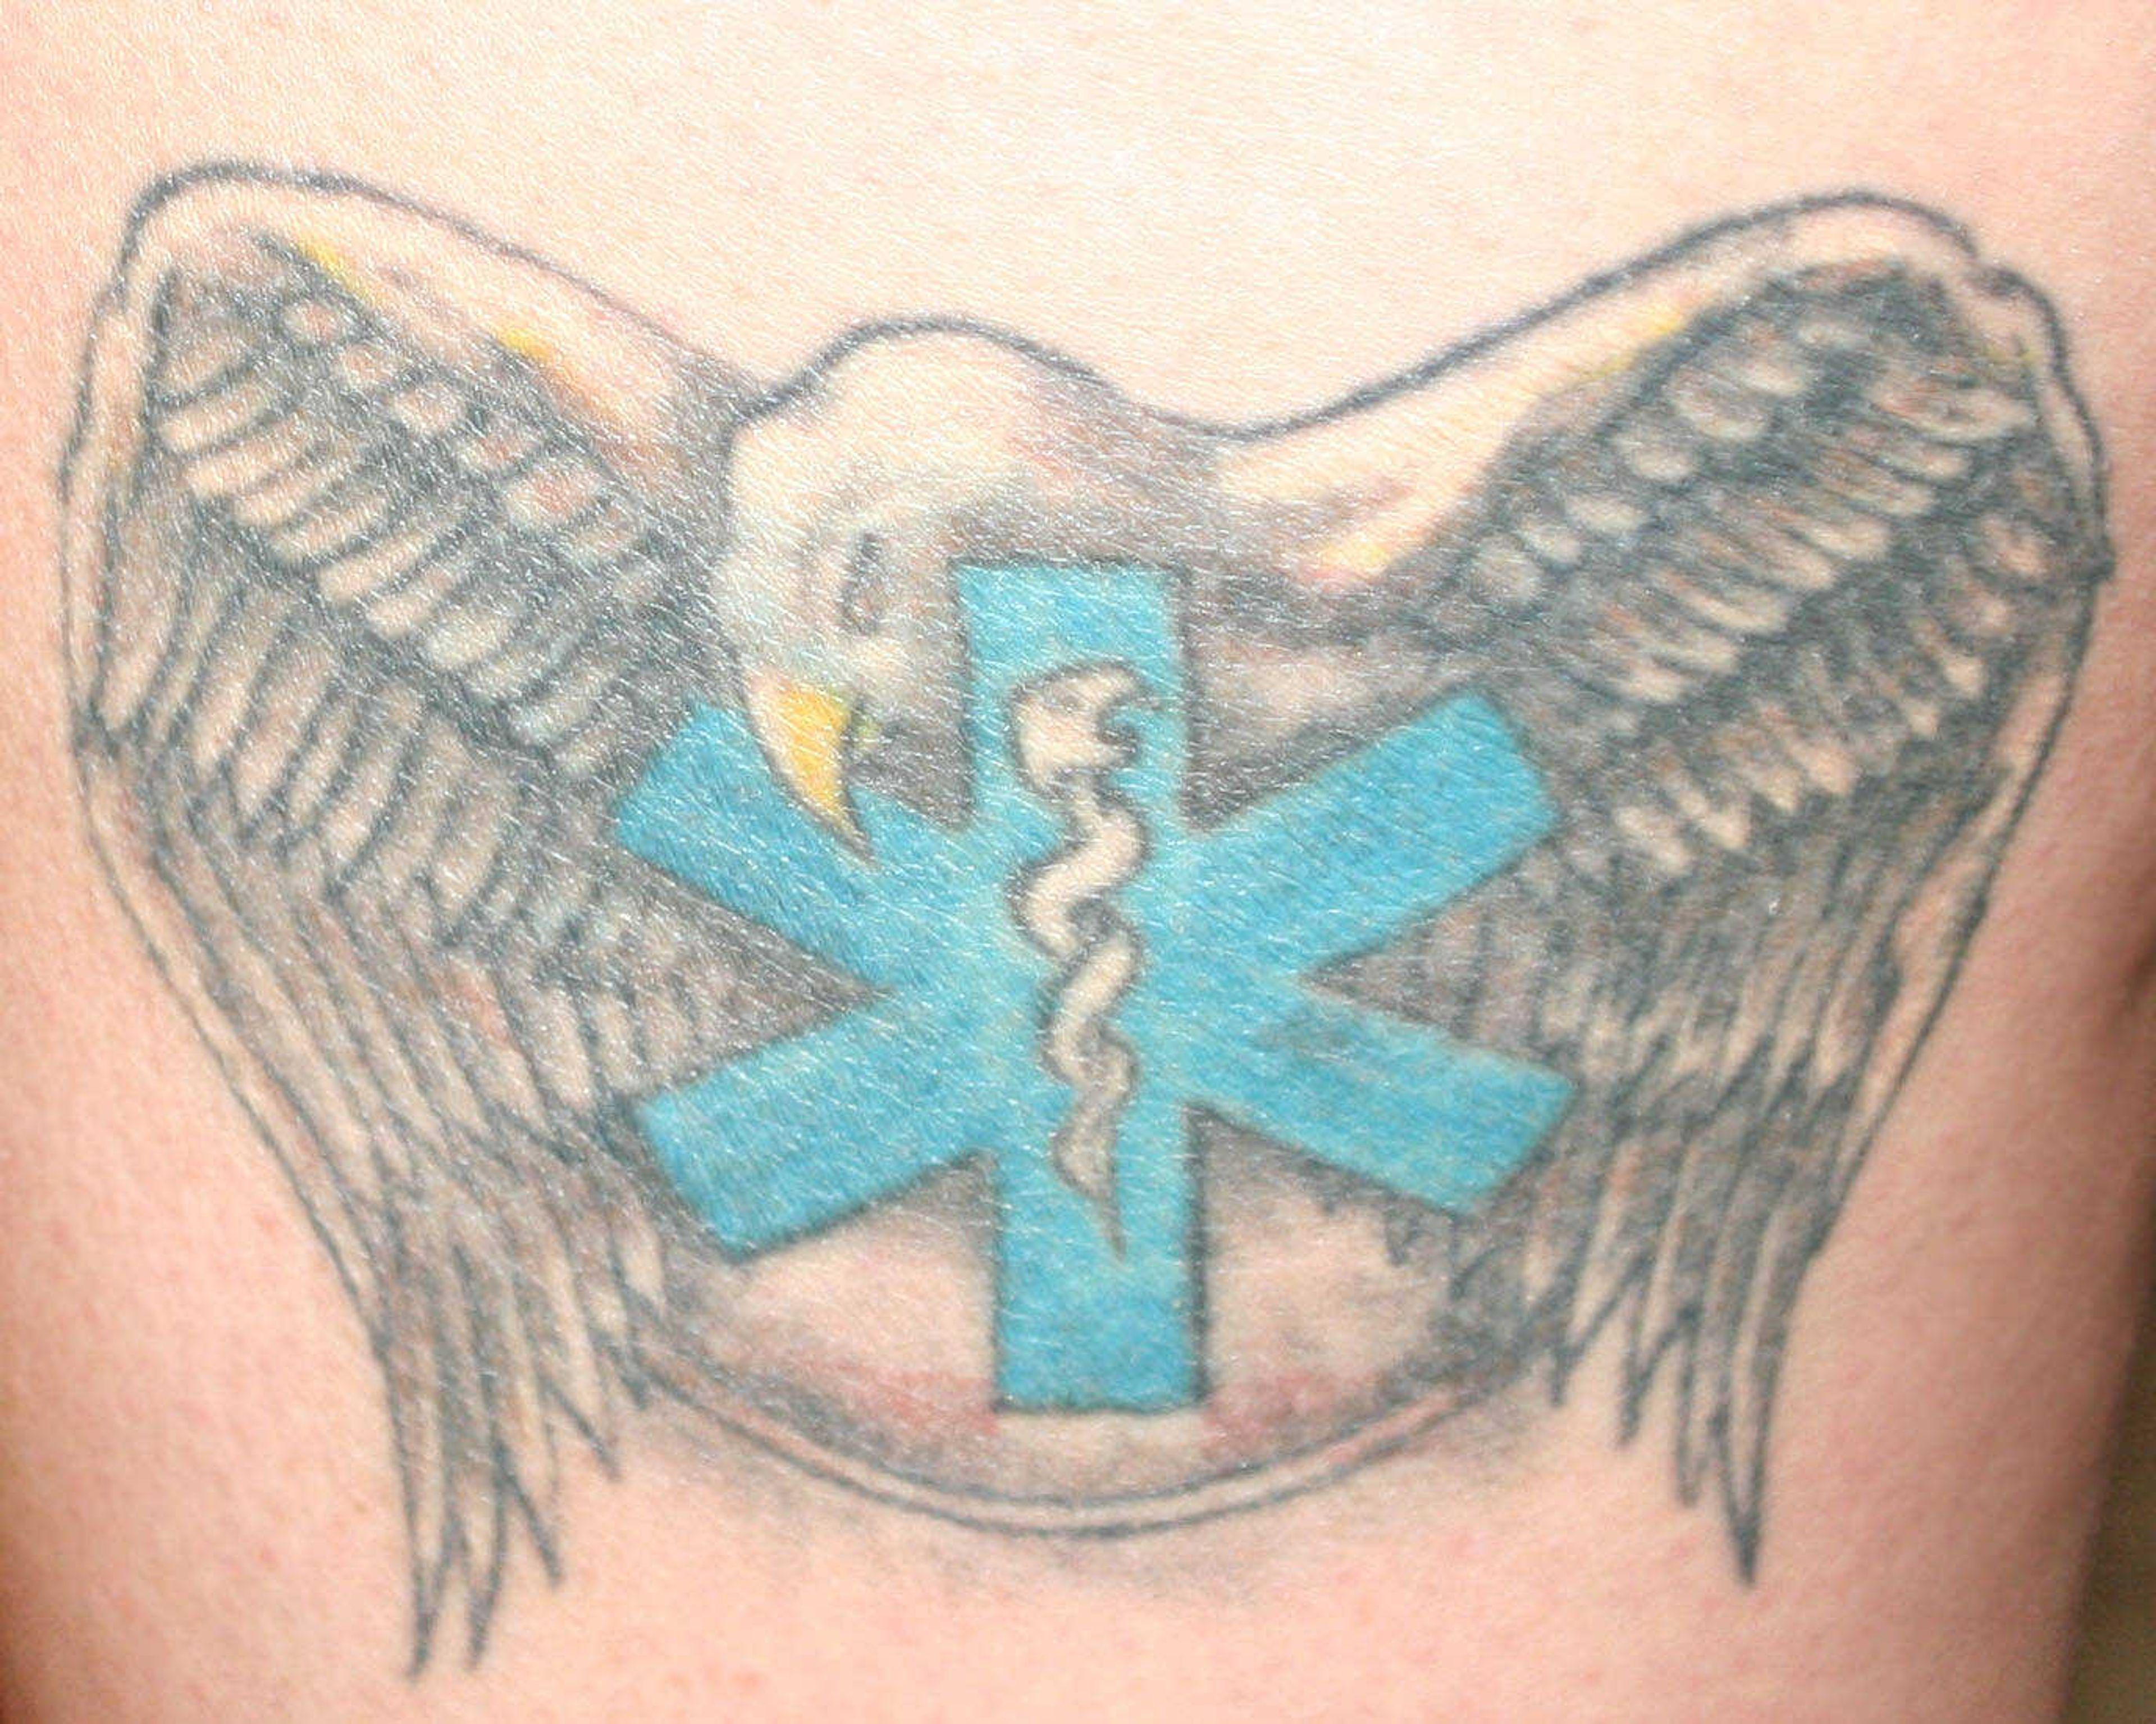 Rebekah Merritt's Tattoo of a star of life with an eagle surrounding it.